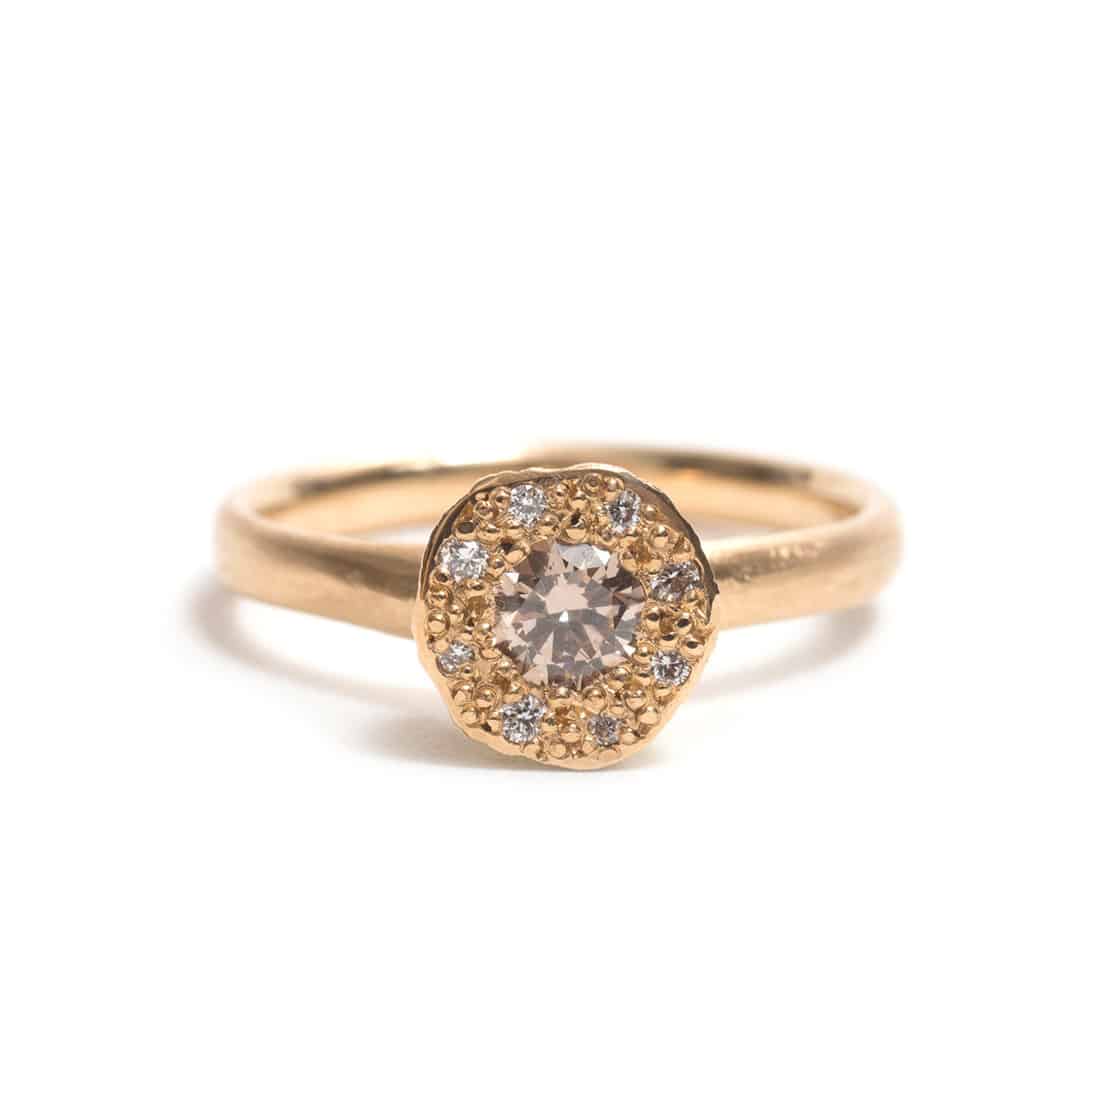 Unique engagement rings by Australian jewelers / Karla Way handcrafted engagement ring